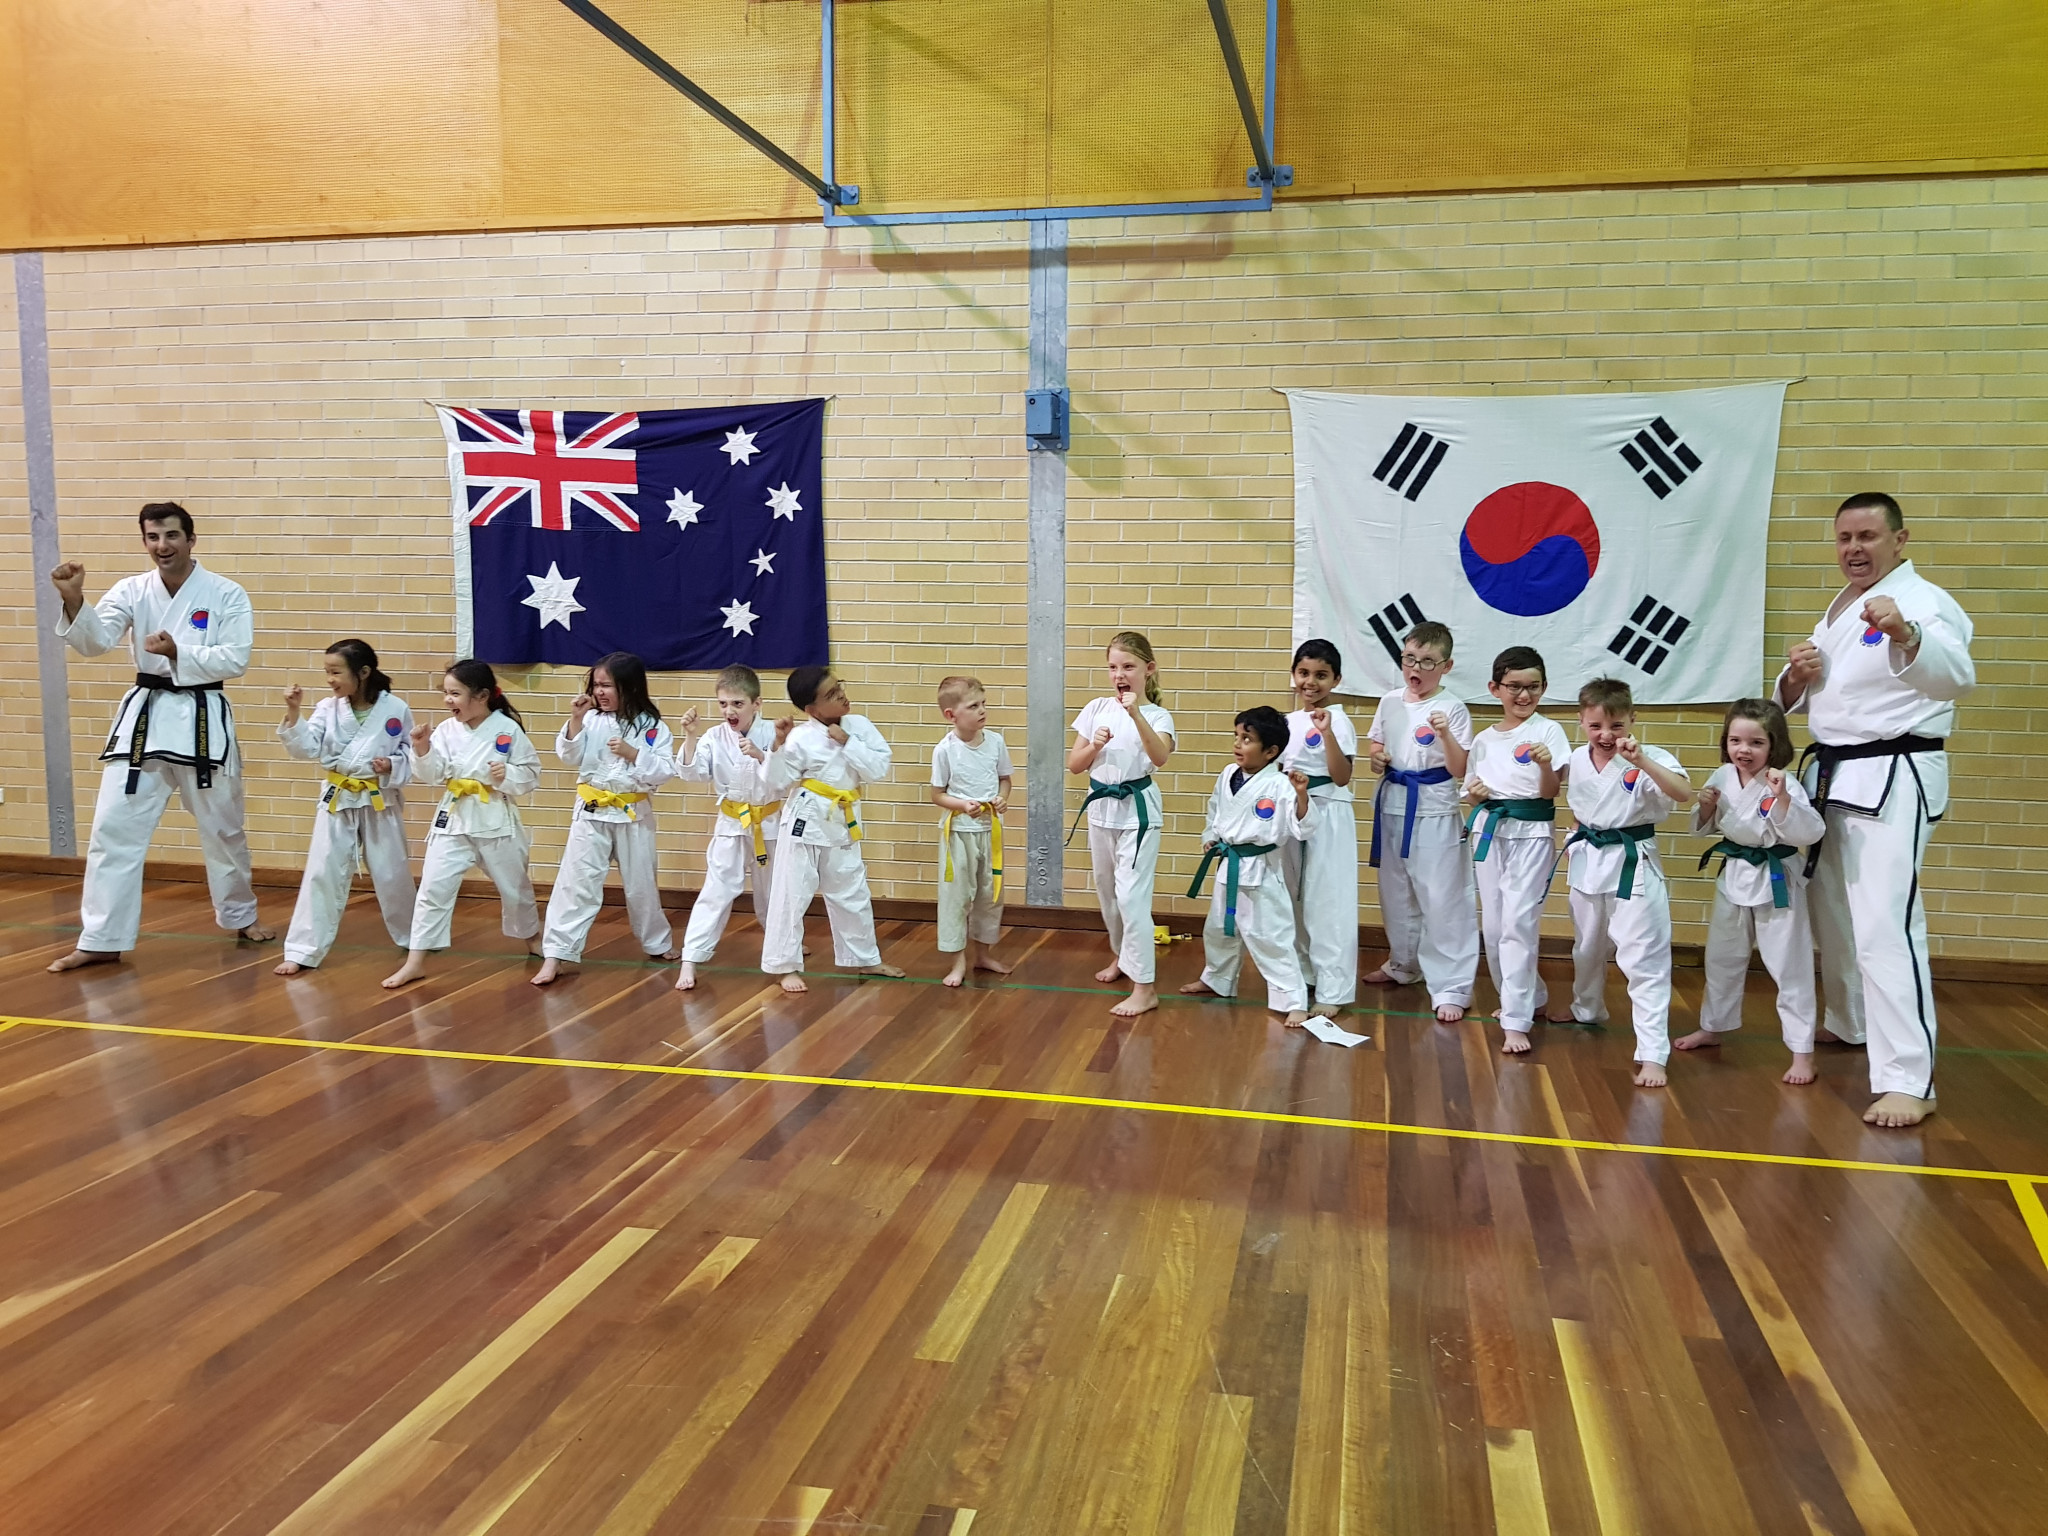 Child safe guidelines and reporting procedures have also been produced by the governing body ©Australian Taekwondo